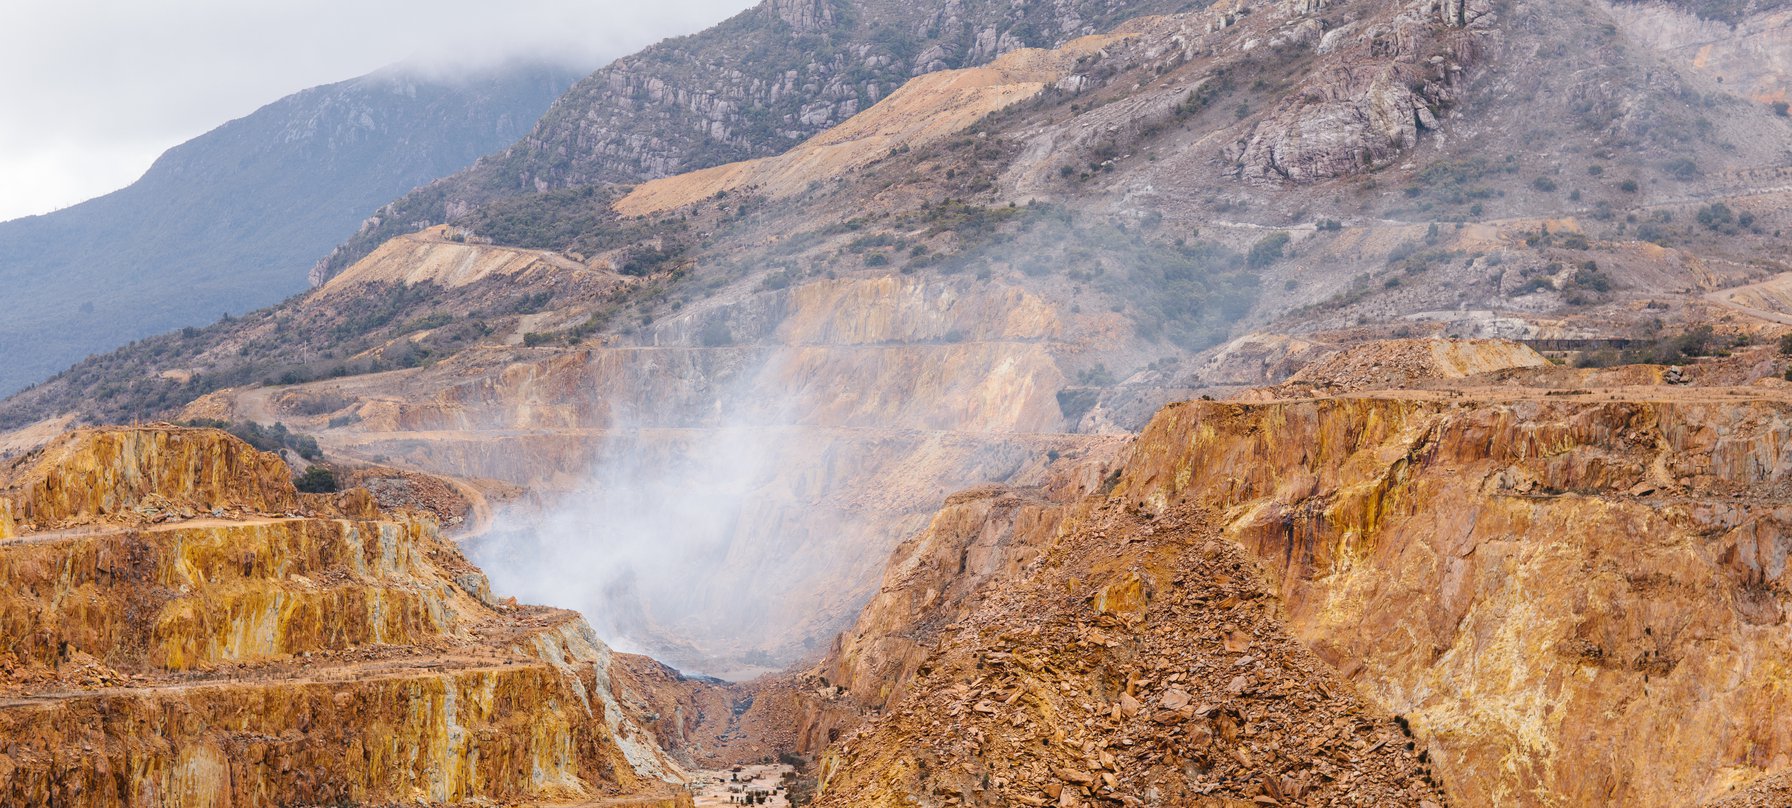 A photo of smoke rising from a terraced mine site at the Mt Lyell mine, with rocky Mt Lyell in the background. Image by Jesse Hunniford.